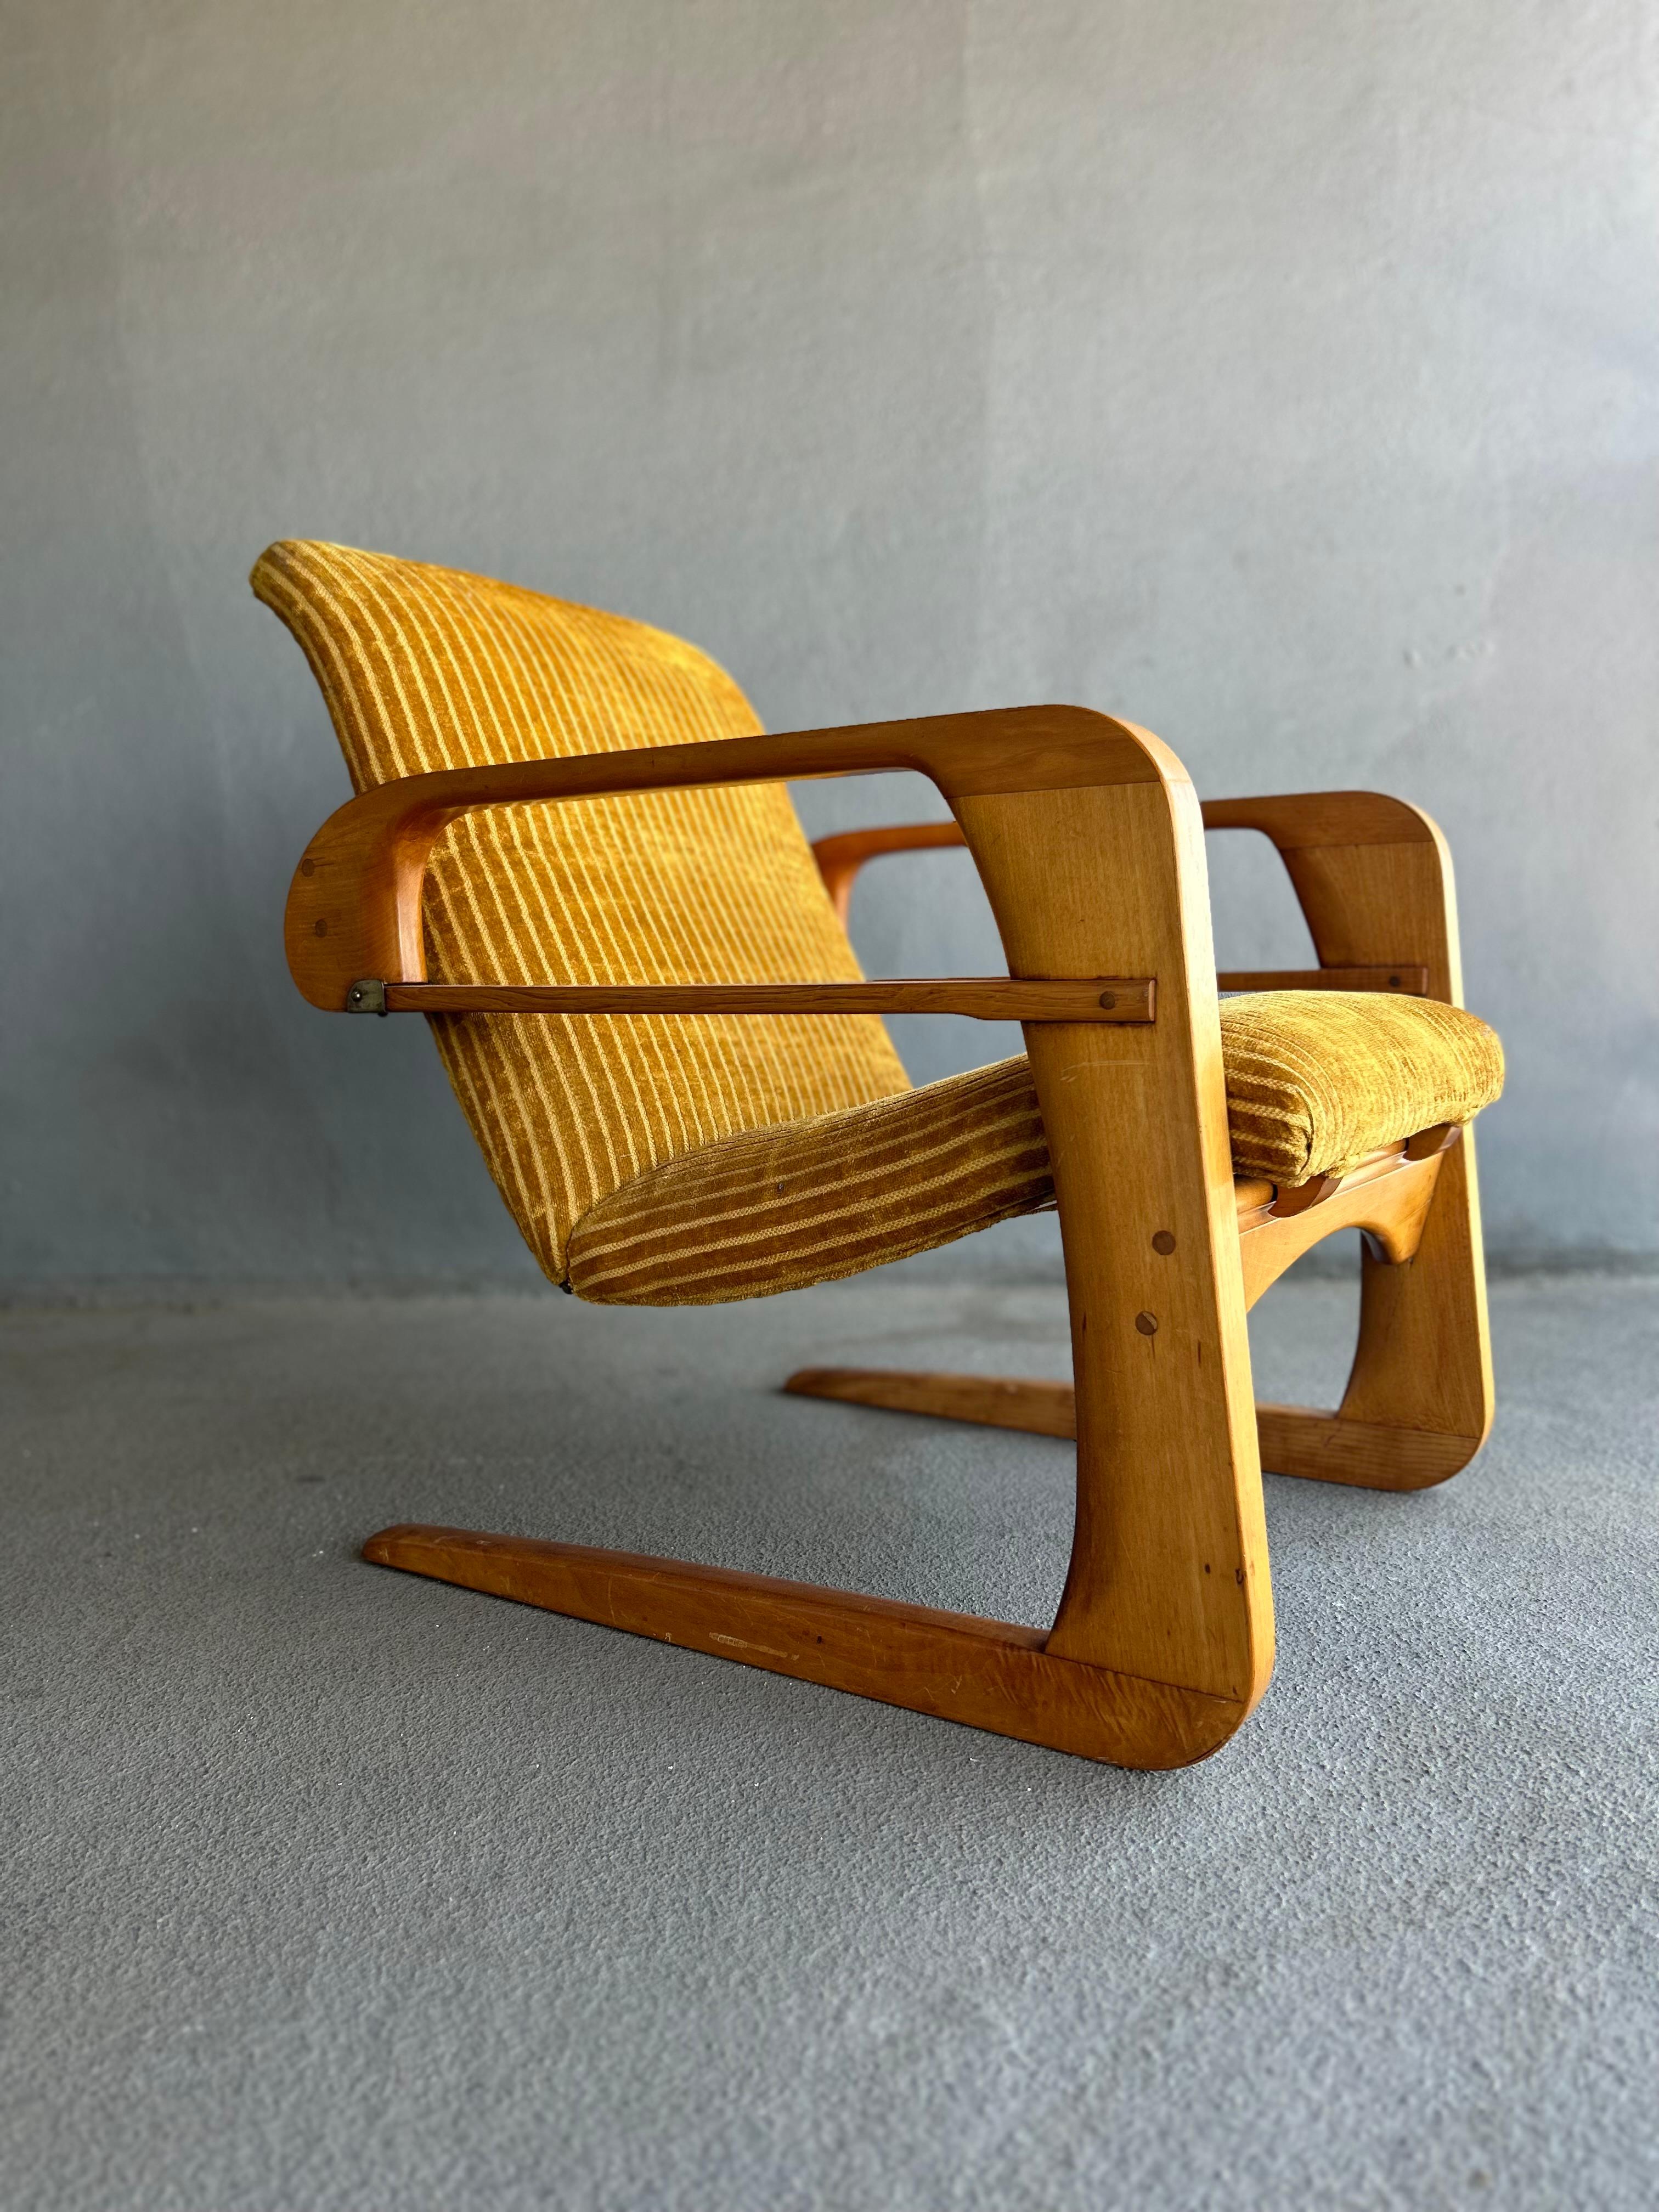 Kem Weber airline chair circa late 1930’s. This chair appears to be all original. 